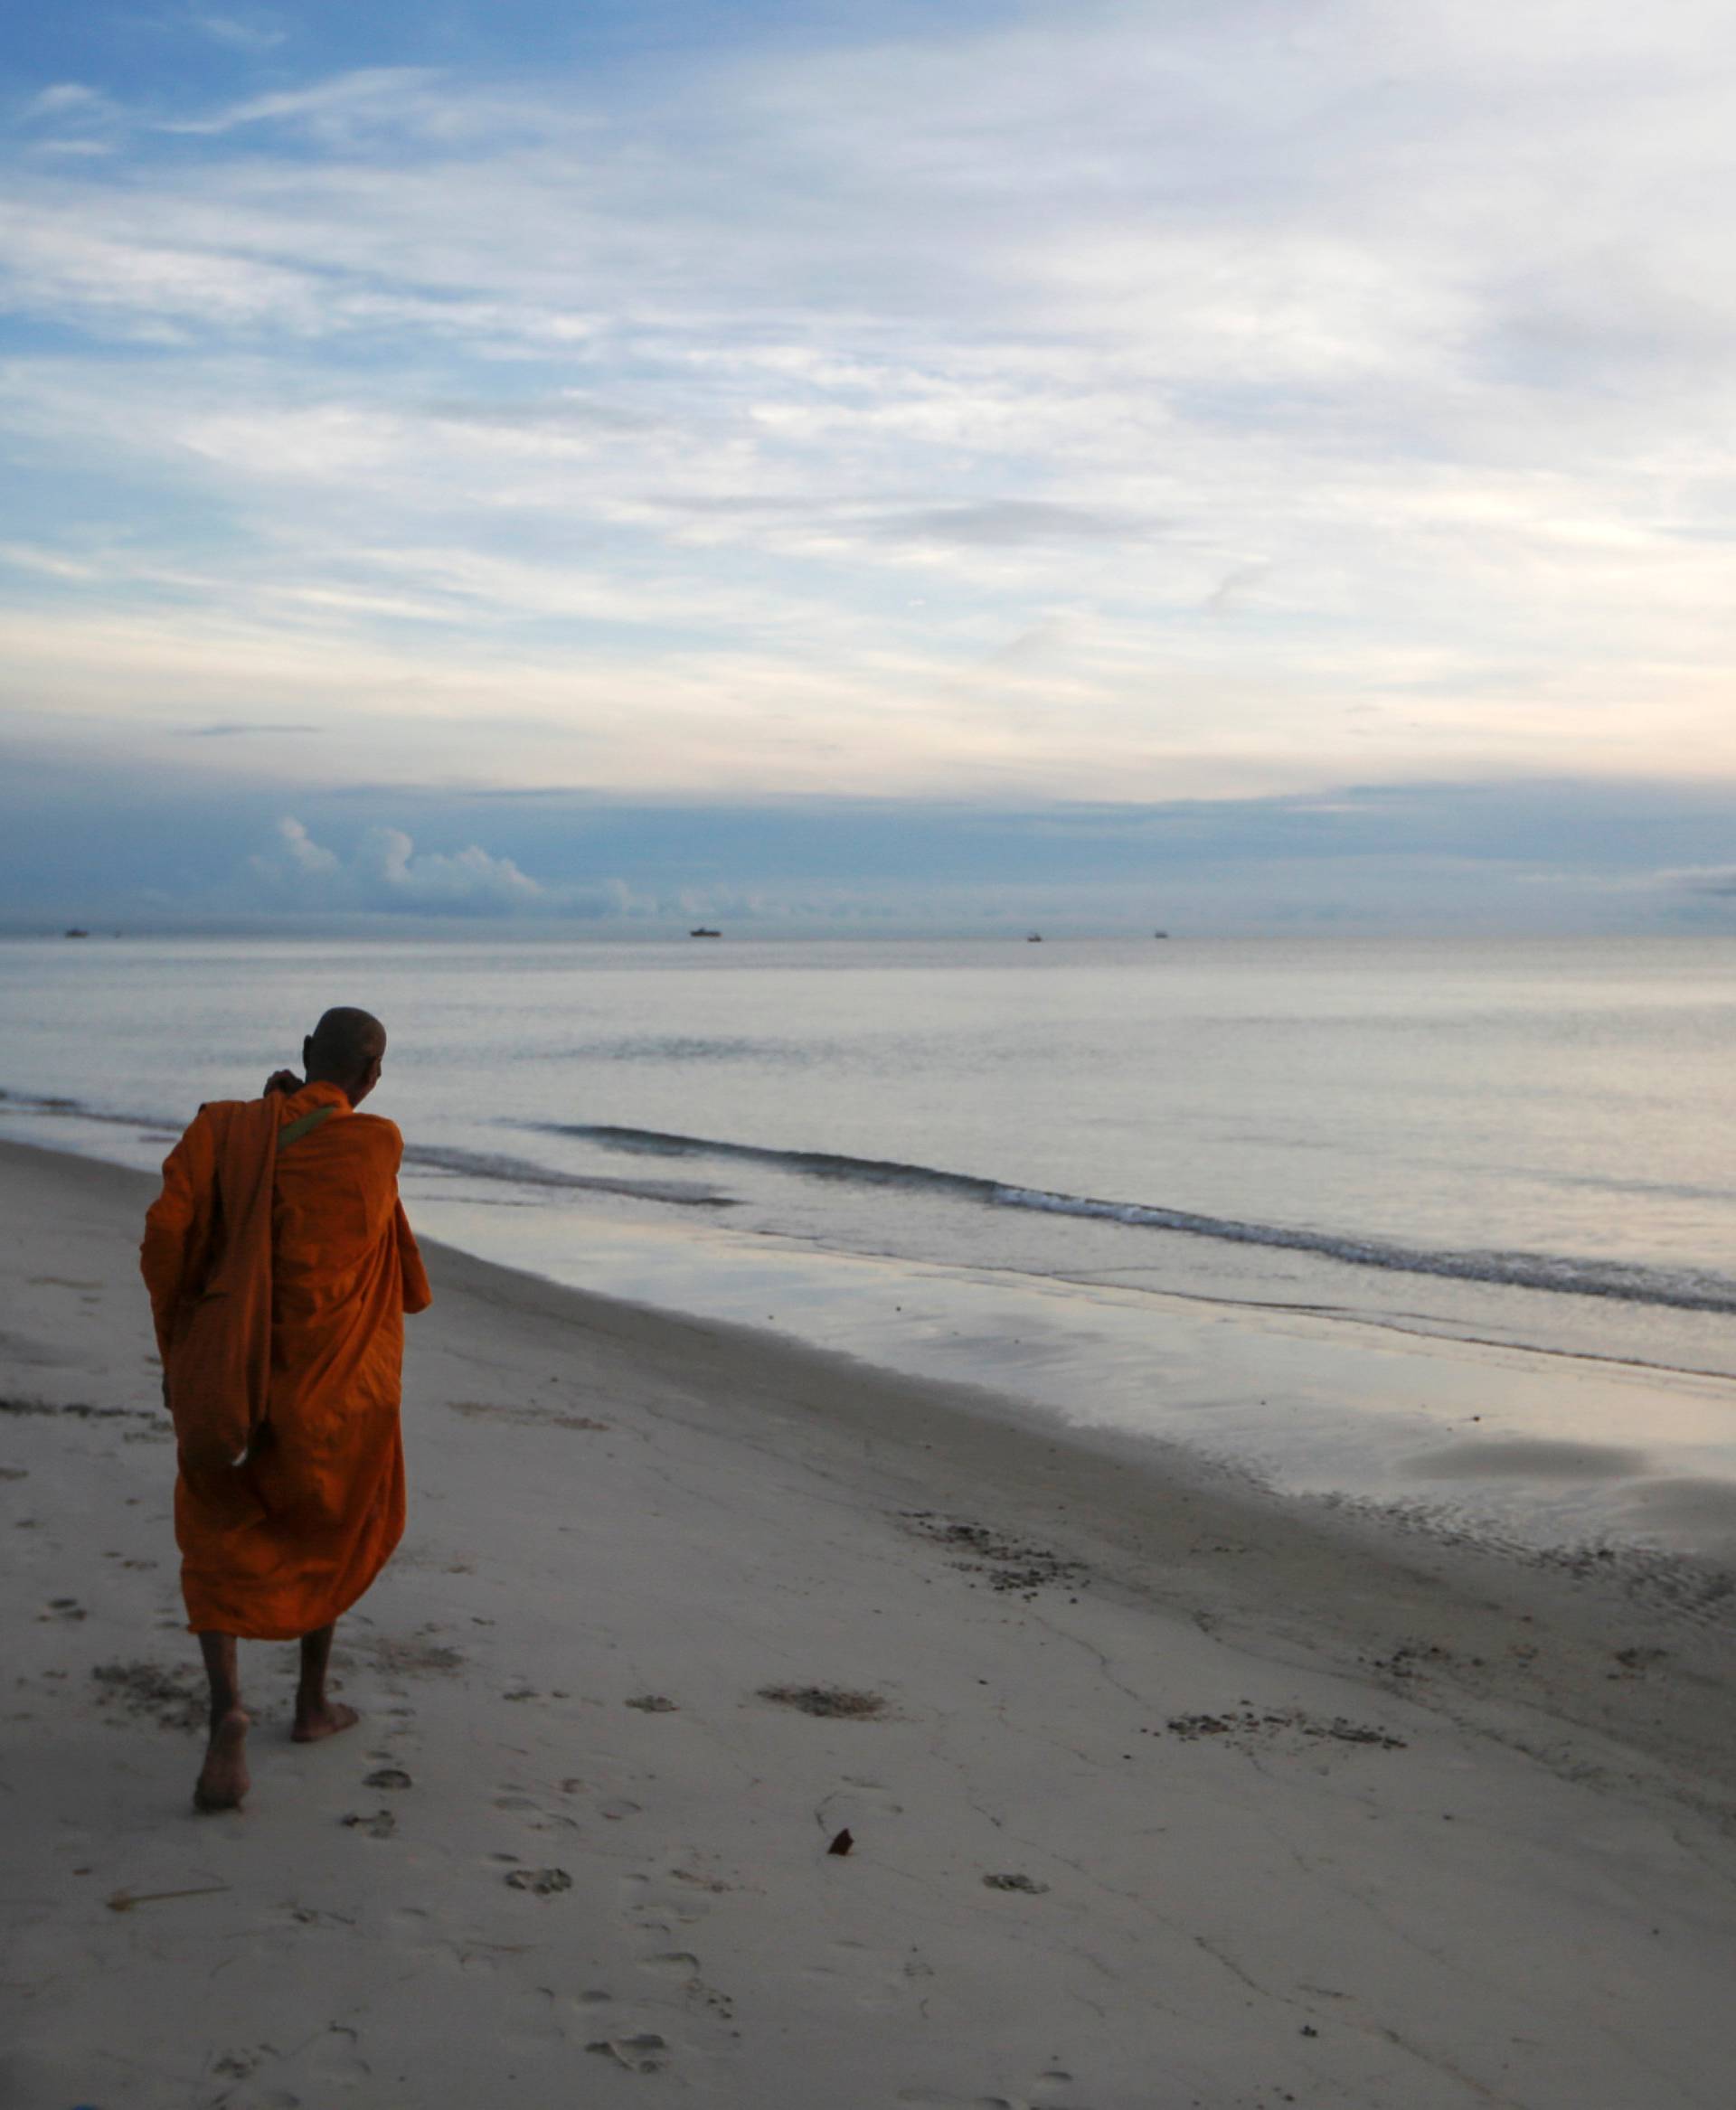 A Buddhist monk walks for alms offerings at a beach in Hua Hin